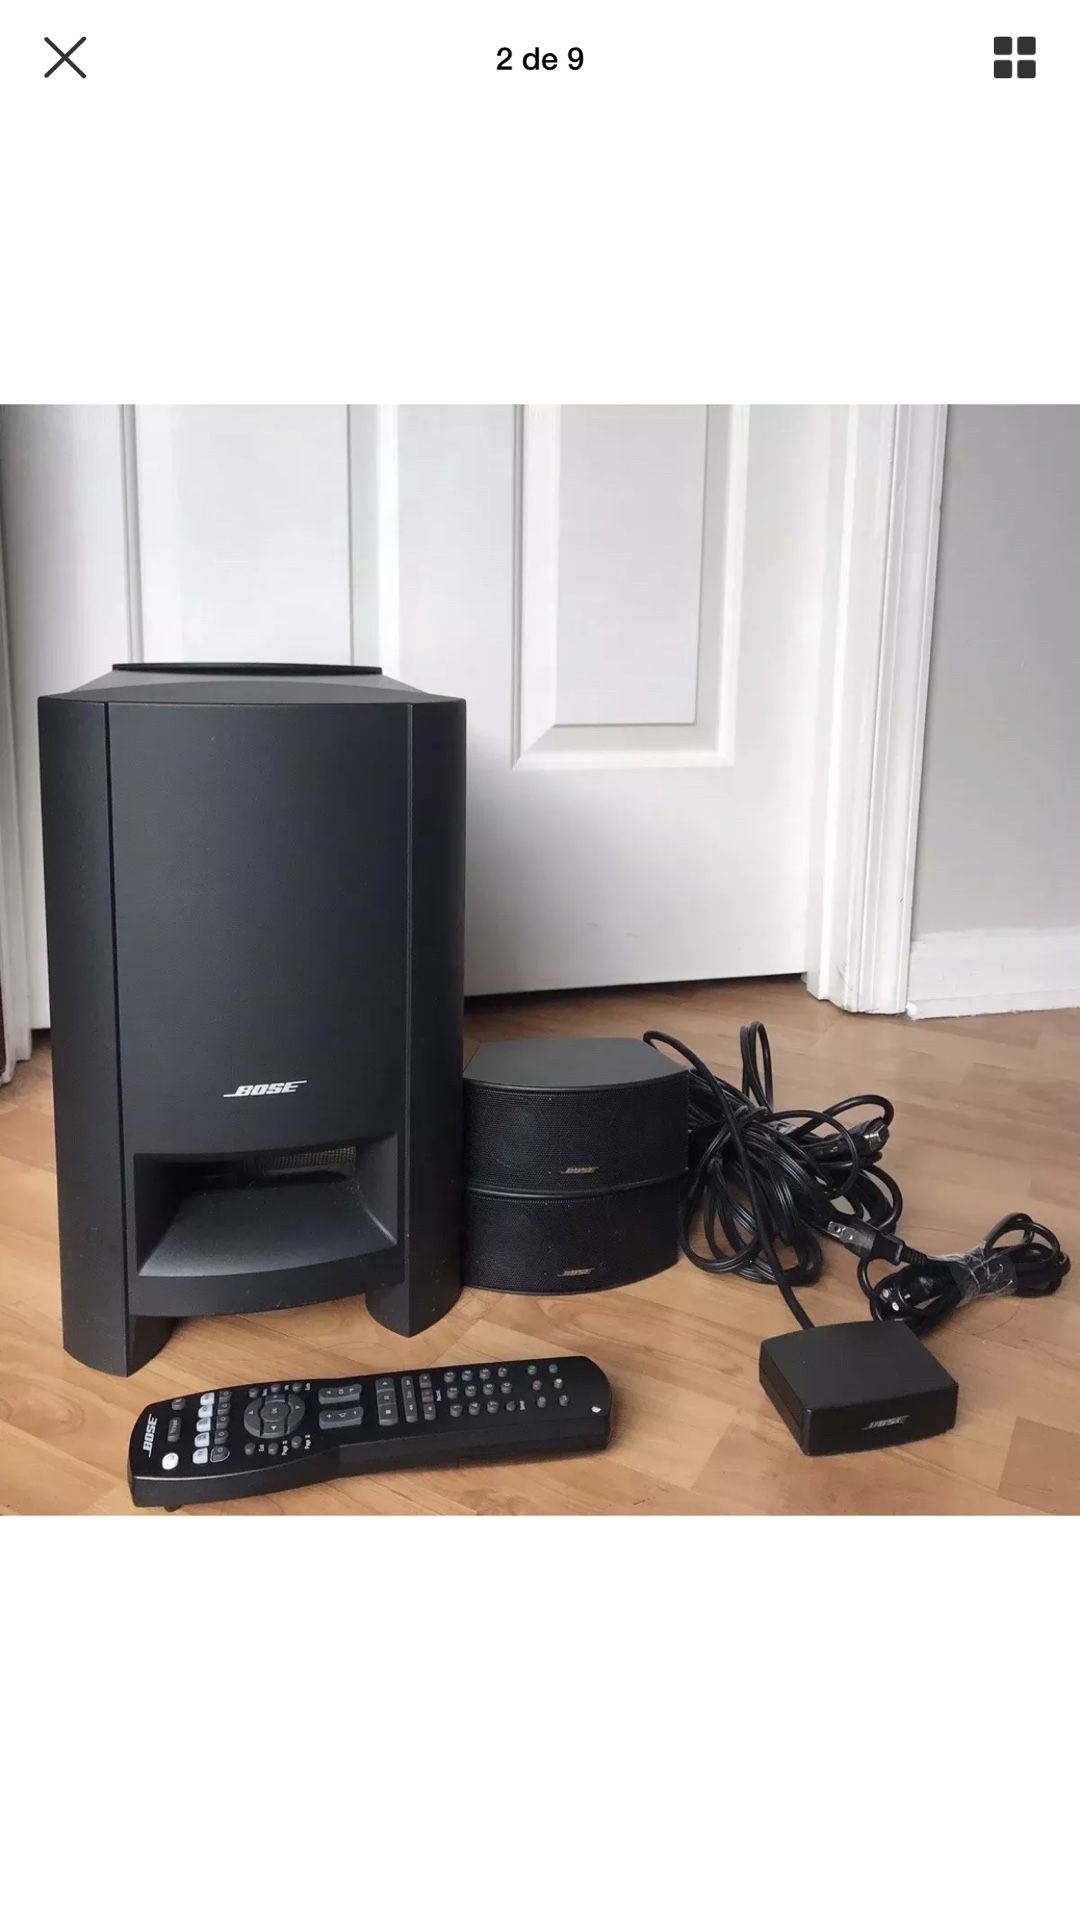 BOSE HOME SYSTEM GOOD CONDITION